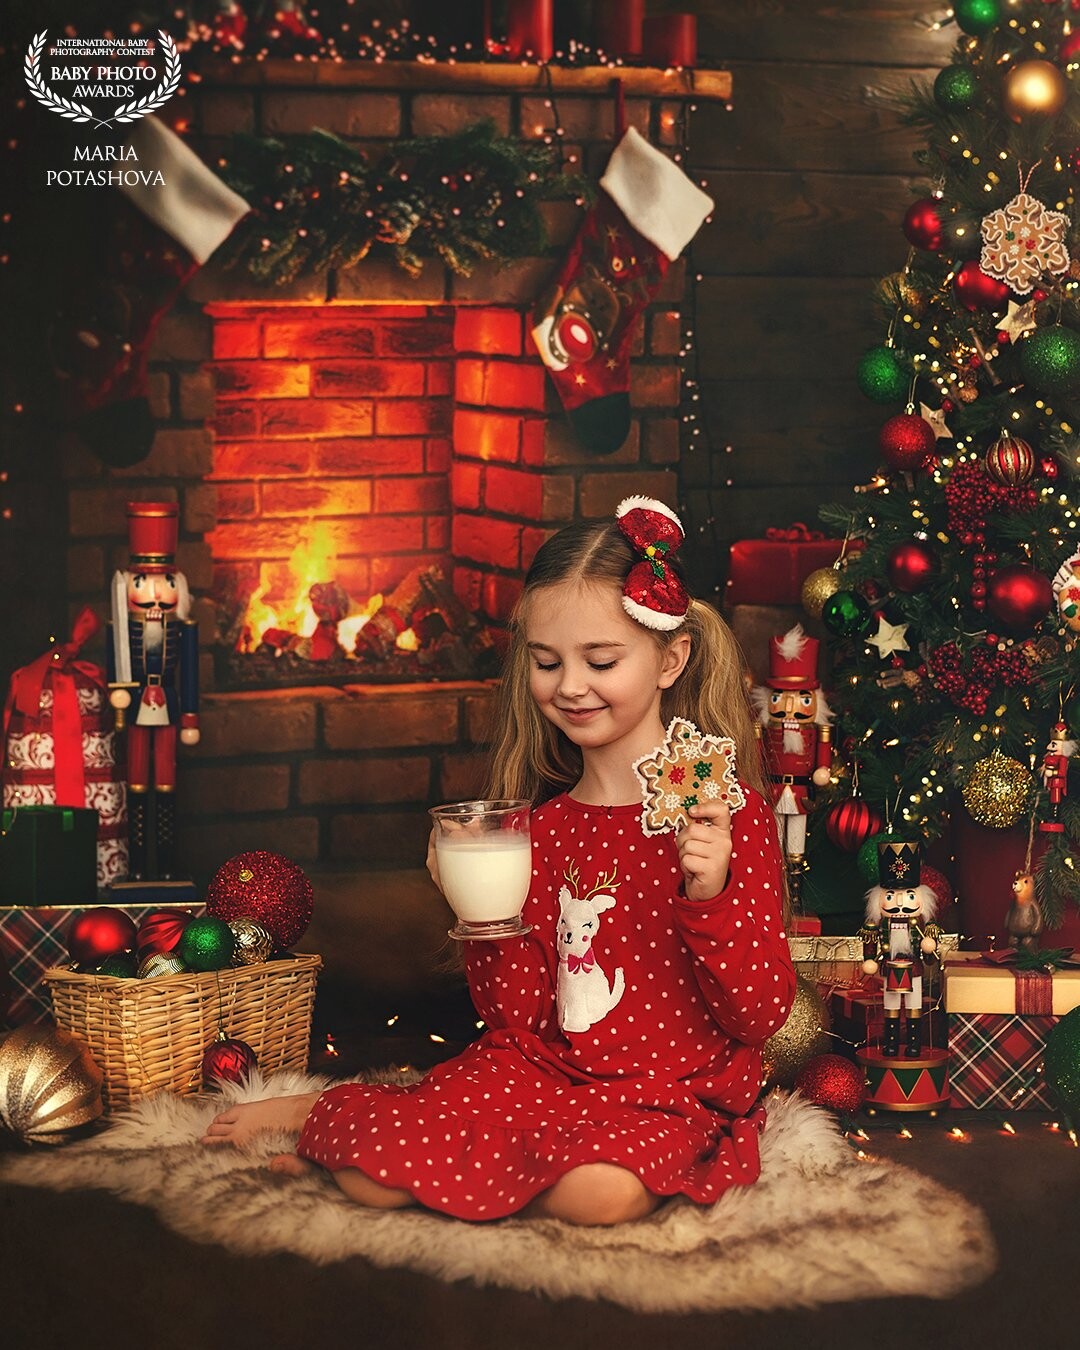 Christmas waves a magic wand over this world, and behold, everything is softer and more beautiful. Decorations, christmas cookies with hot milk is what we need for the smells of Christmas which are the smells of childhood.